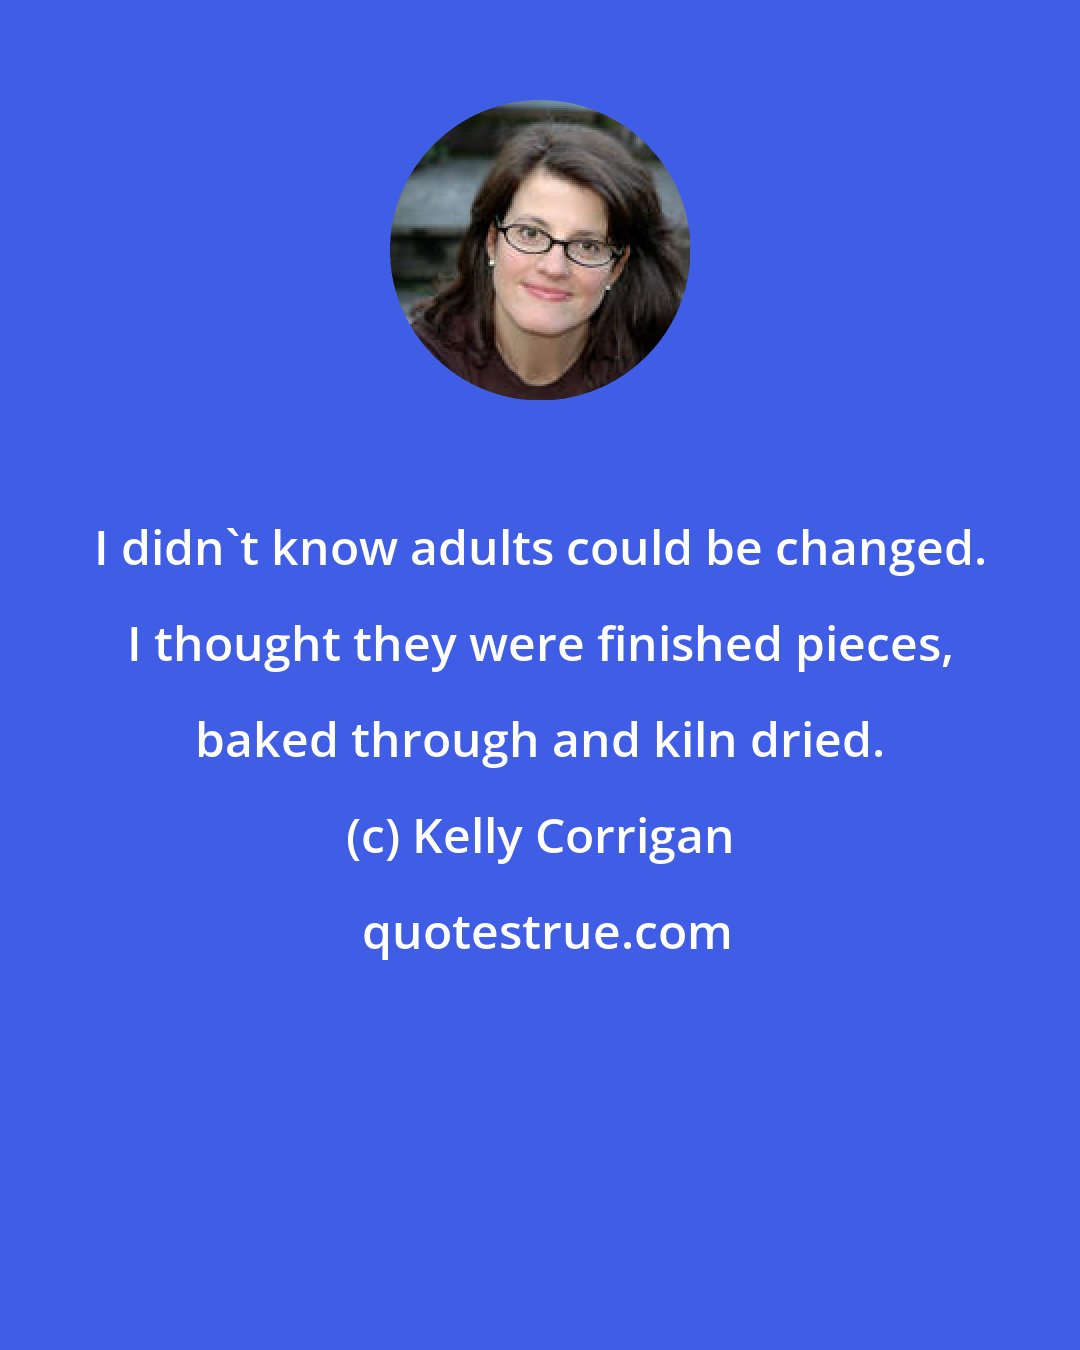 Kelly Corrigan: I didn't know adults could be changed. I thought they were finished pieces, baked through and kiln dried.